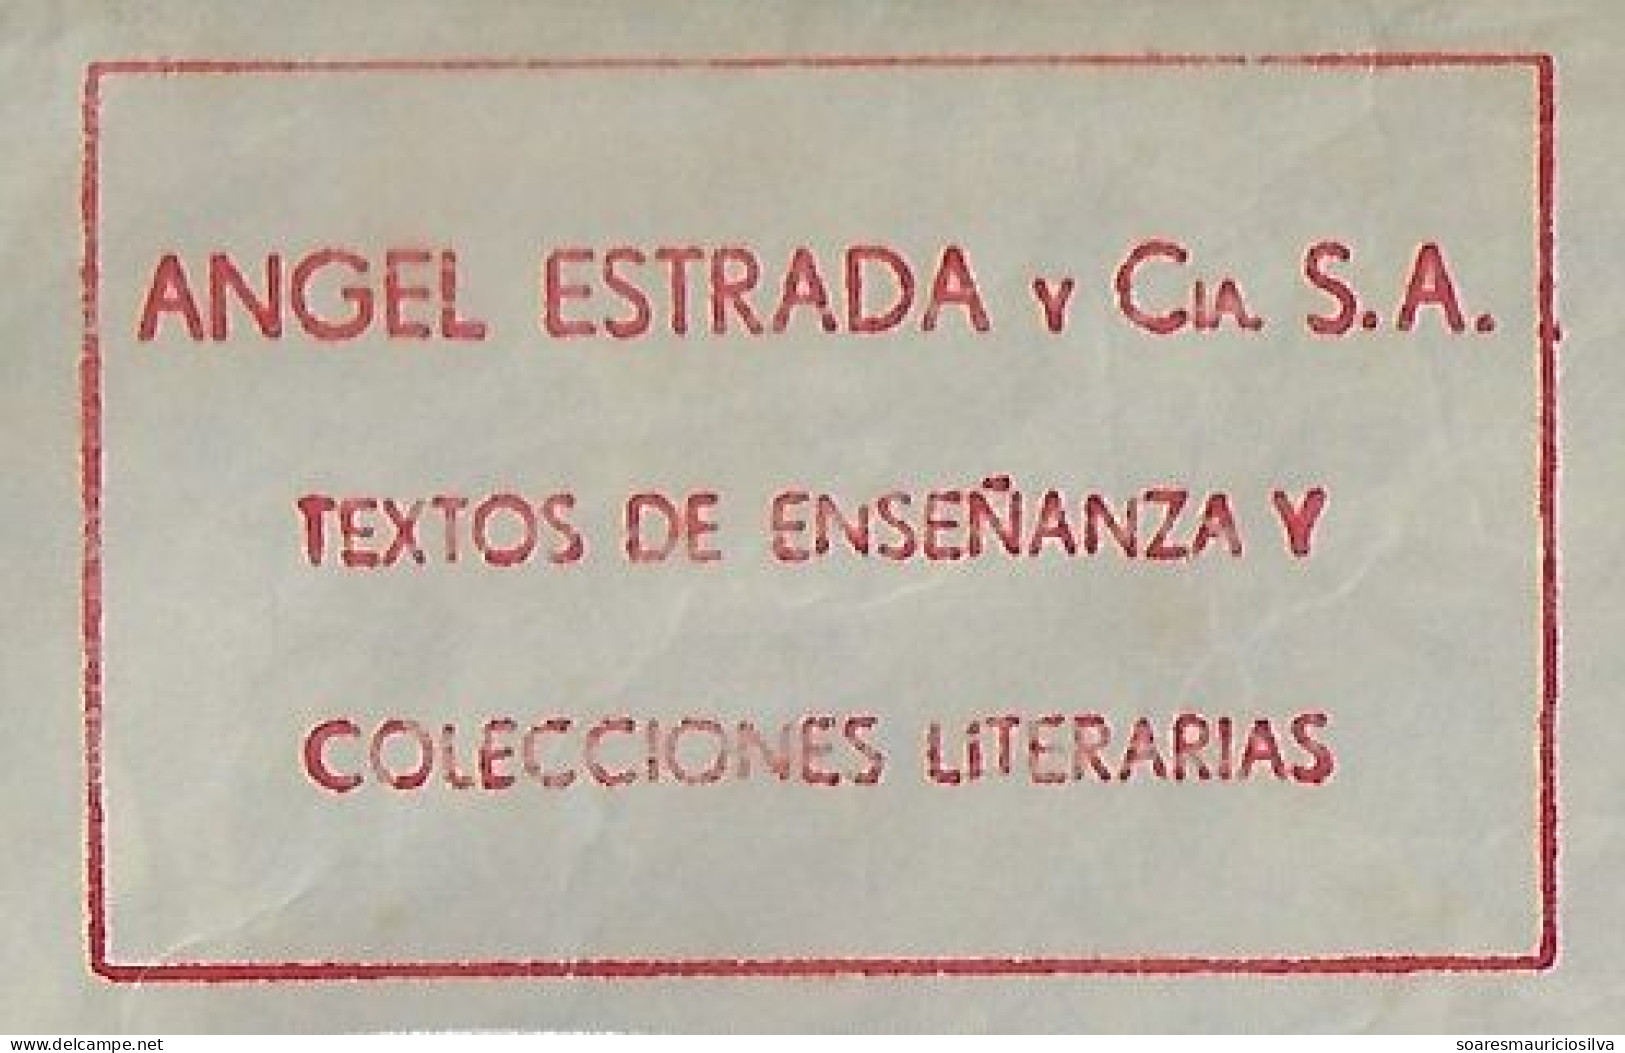 Argentina 1972 Cover From Buenos Aires Meter Stamp Hasler Slogan Angel Estrada Co. teaching Texts & Literary Collections - Brieven En Documenten